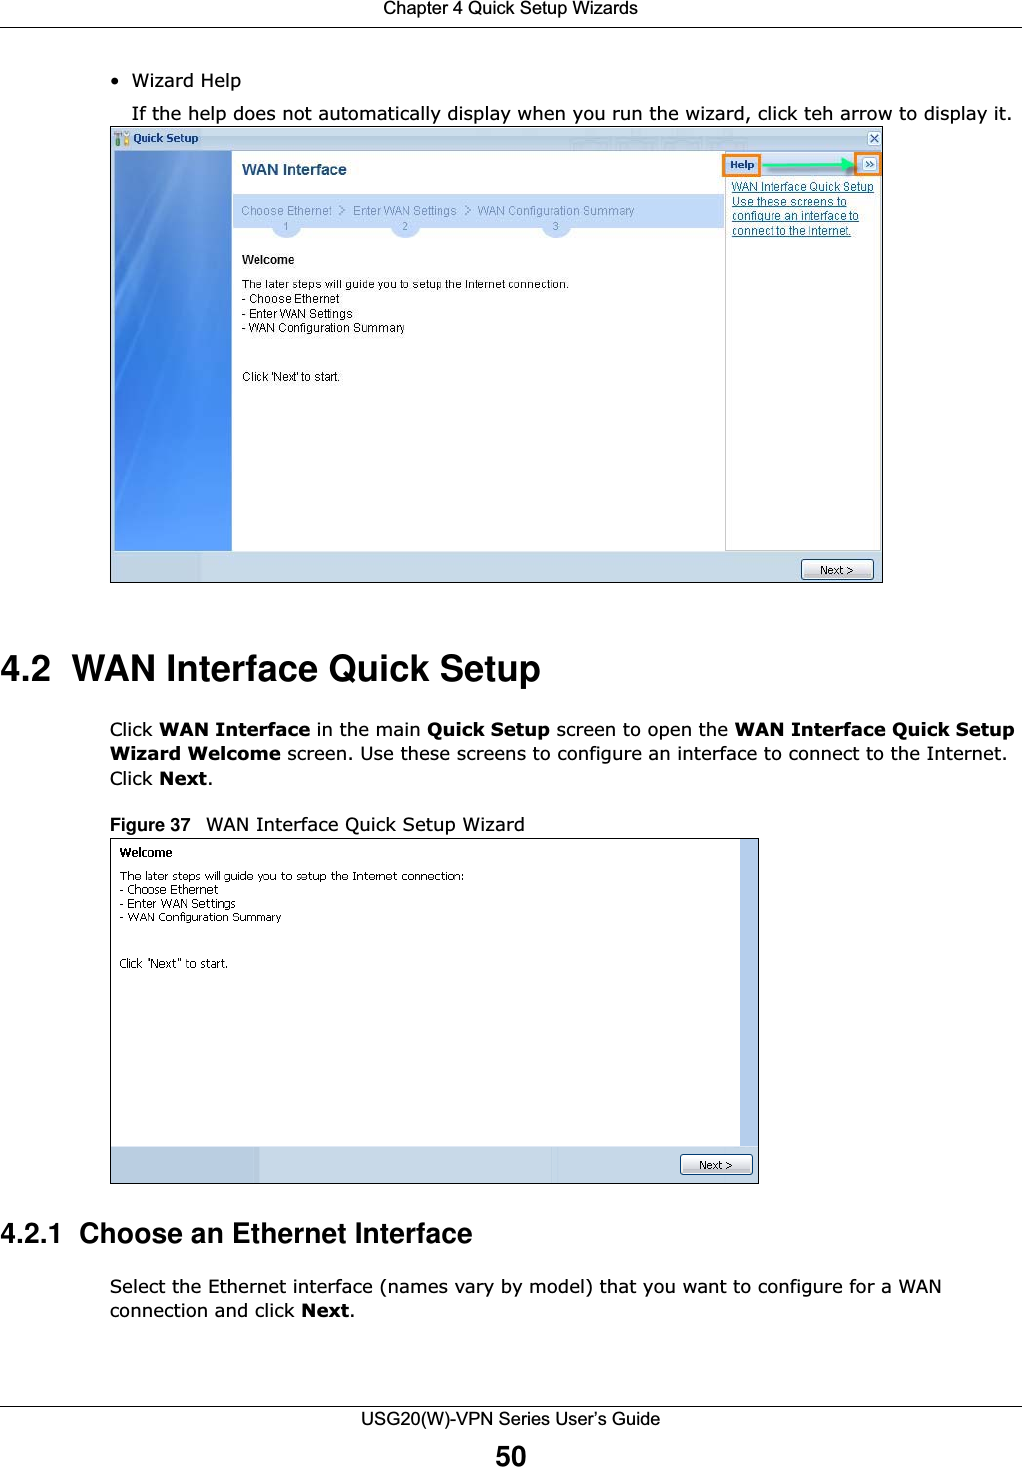 Chapter 4 Quick Setup WizardsUSG20(W)-VPN Series User’s Guide50•Wizard HelpIf the help does not automatically display when you run the wizard, click teh arrow to display it.4.2  WAN Interface Quick SetupClick WAN Interface in the main Quick Setup screen to open the WAN Interface Quick Setup Wizard Welcome screen. Use these screens to configure an interface to connect to the Internet. Click Next.Figure 37   WAN Interface Quick Setup Wizard    4.2.1  Choose an Ethernet InterfaceSelect the Ethernet interface (names vary by model) that you want to configure for a WAN connection and click Next.